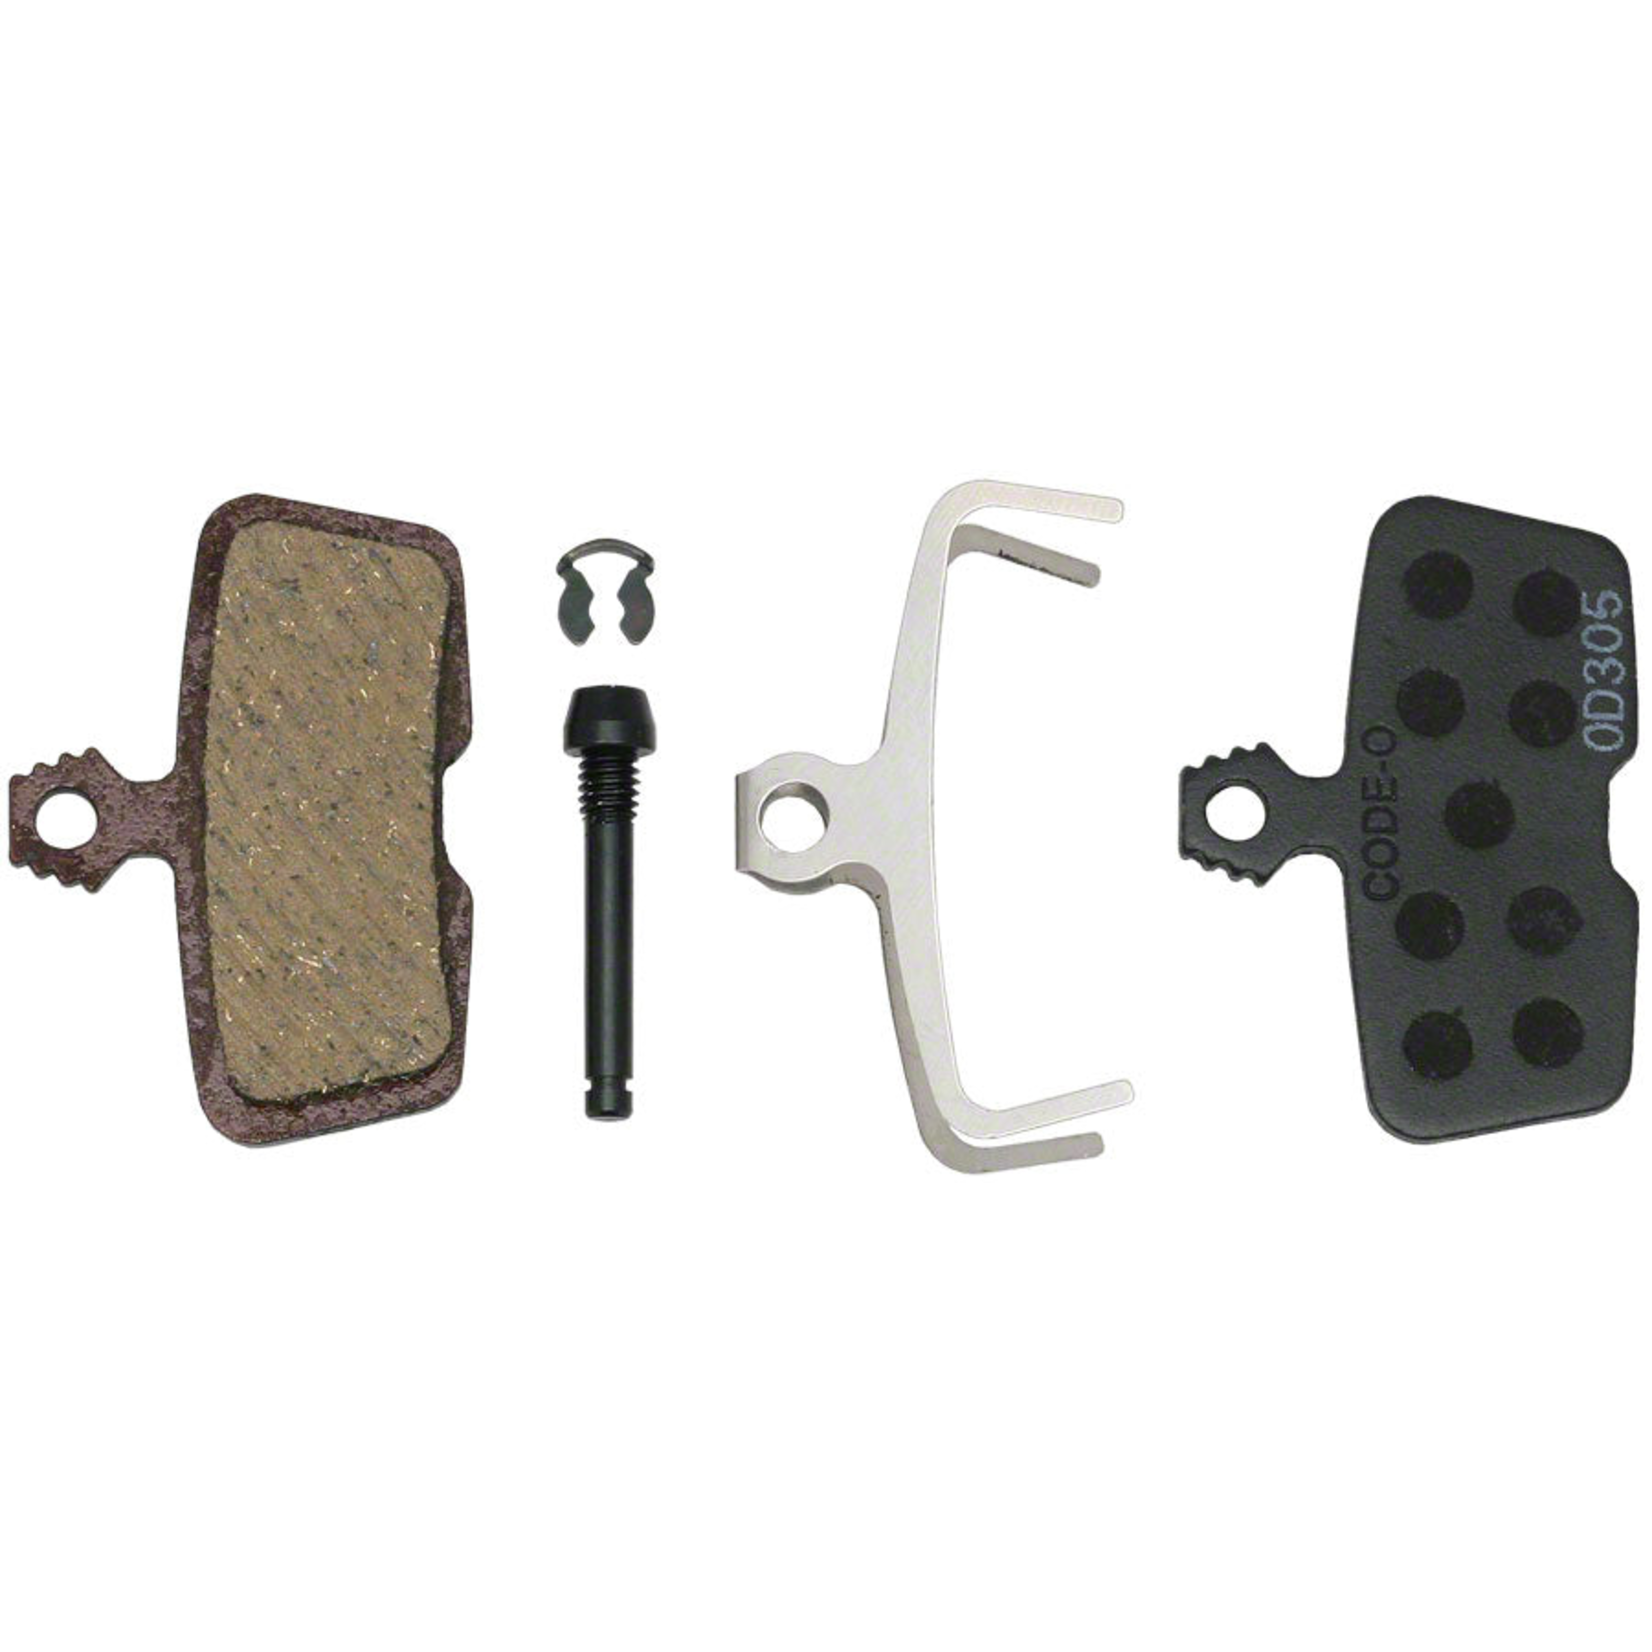 SRAM Disc Brake Pads - Organic Compound, Steel Backed, Quiet, For Code 2011+ and Guide RE